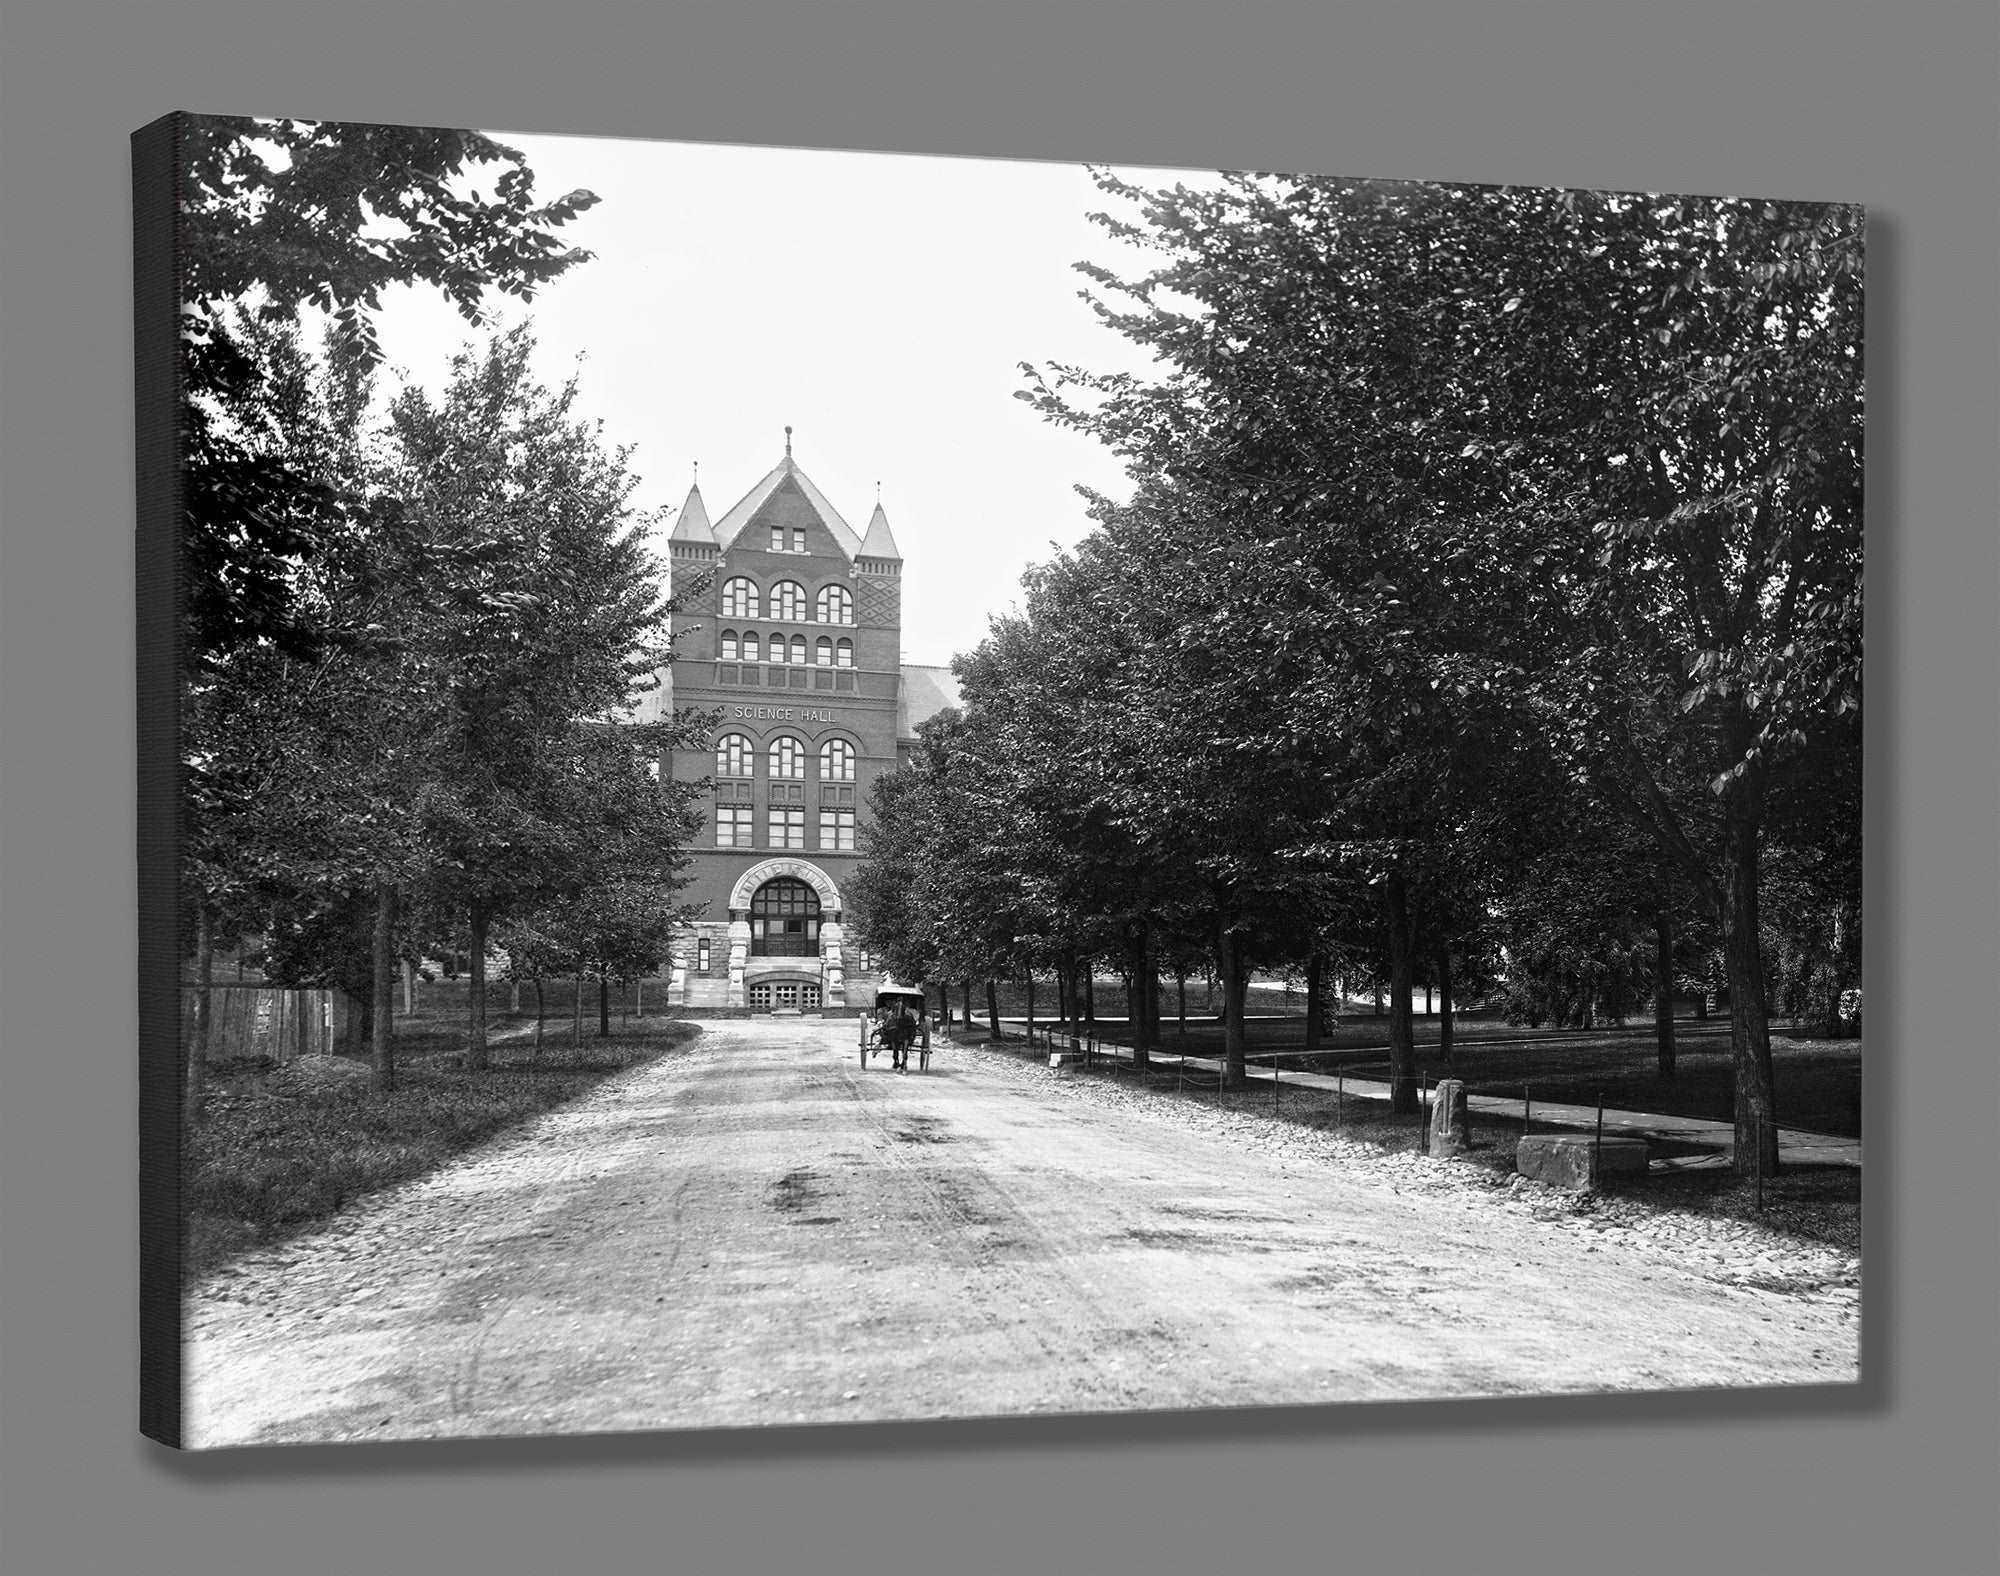 A stretched canvas print reproduction of vintage photography of the campus of the University of Wisconsin